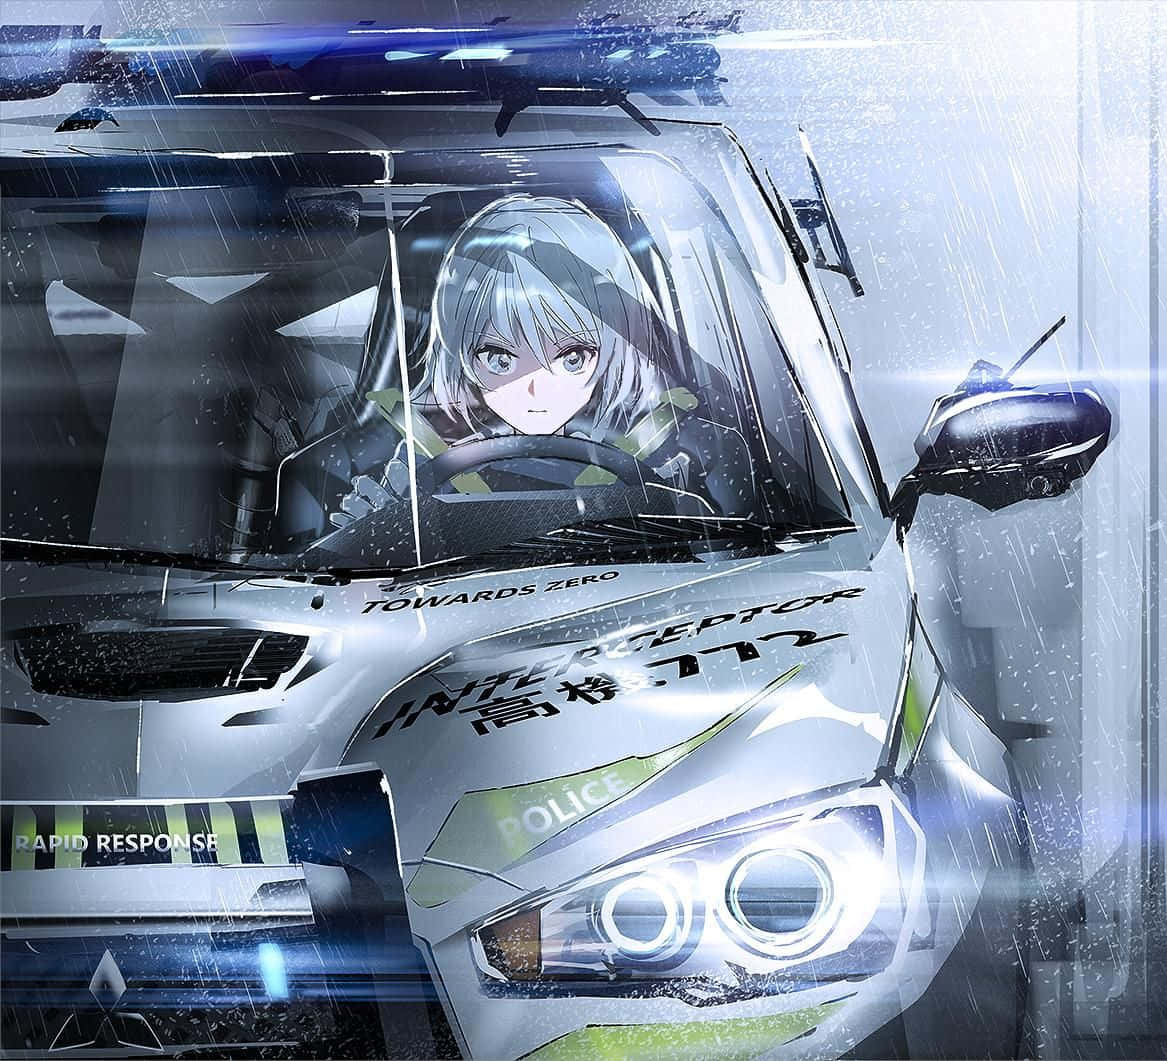 andrea mcalister recommends Anime Girl In Police Car